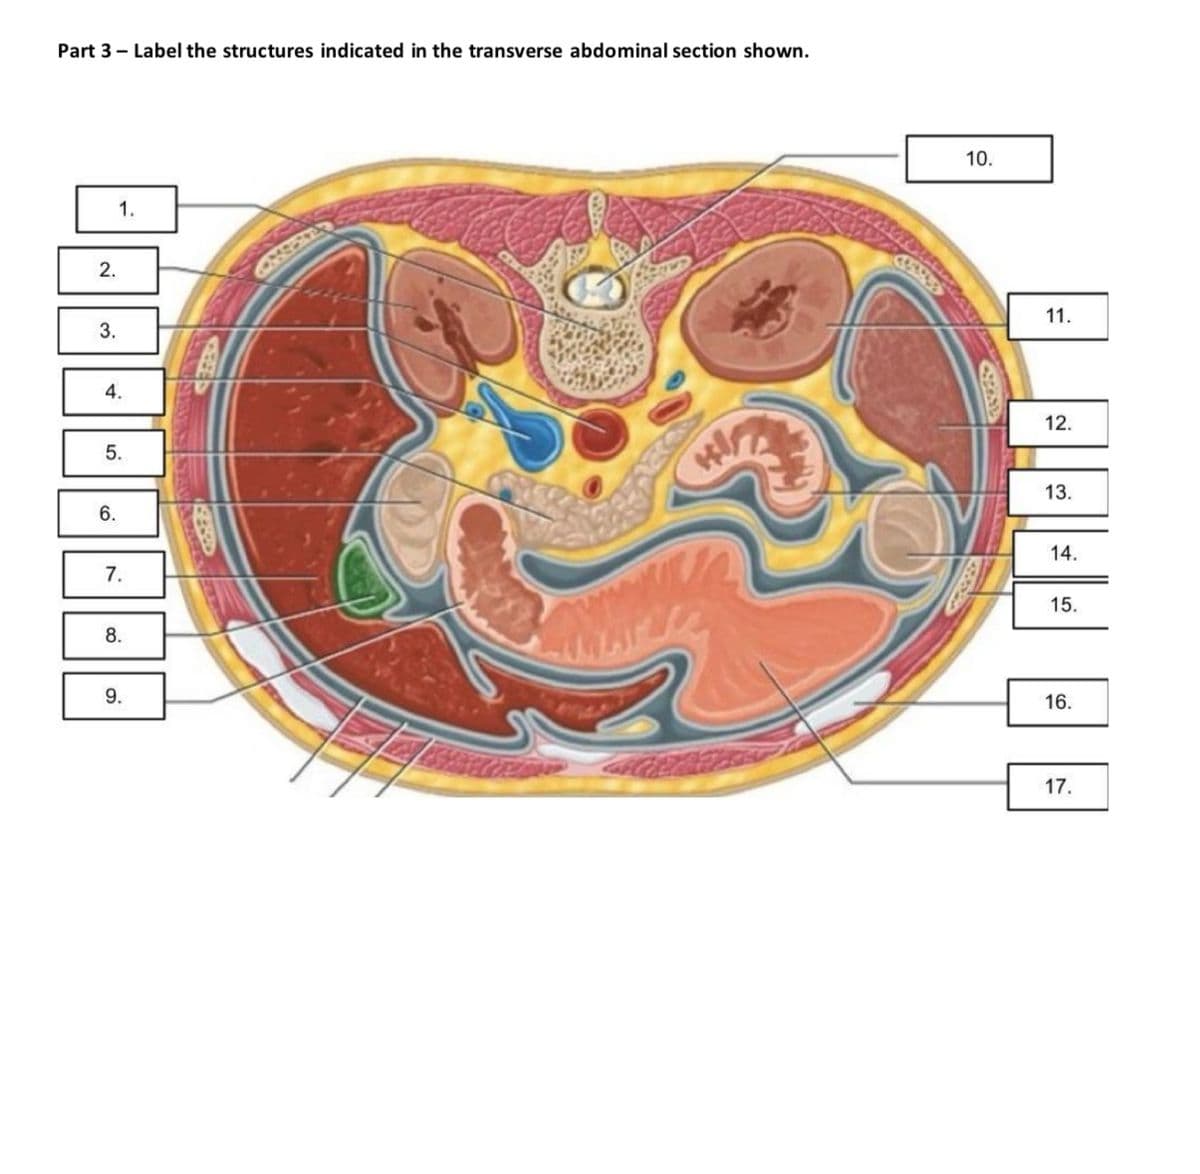 Part 3 - Label the structures indicated in the transverse abdominal section shown.
2.
3.
1.
4.
5.
6.
10.
10
11.
12.
13.
7.
8.
14.
15.
9.
16.
17.